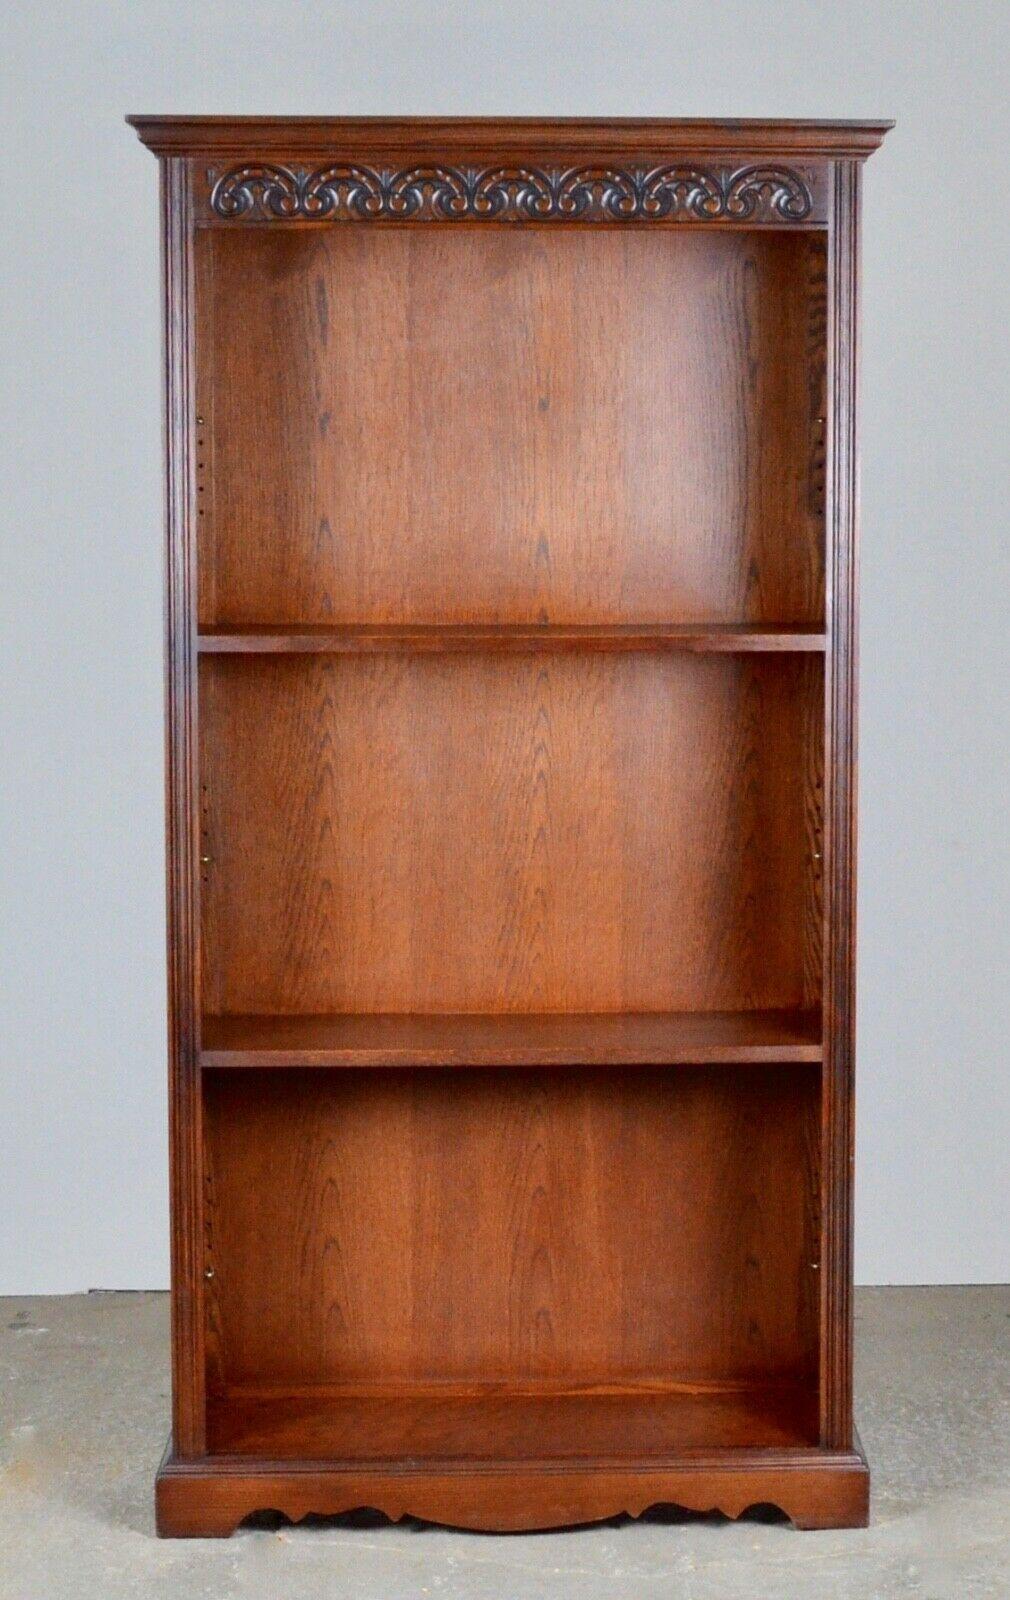 Old Charm Made in England Oak Timber Library Bookcases Adjustable Shelves 5